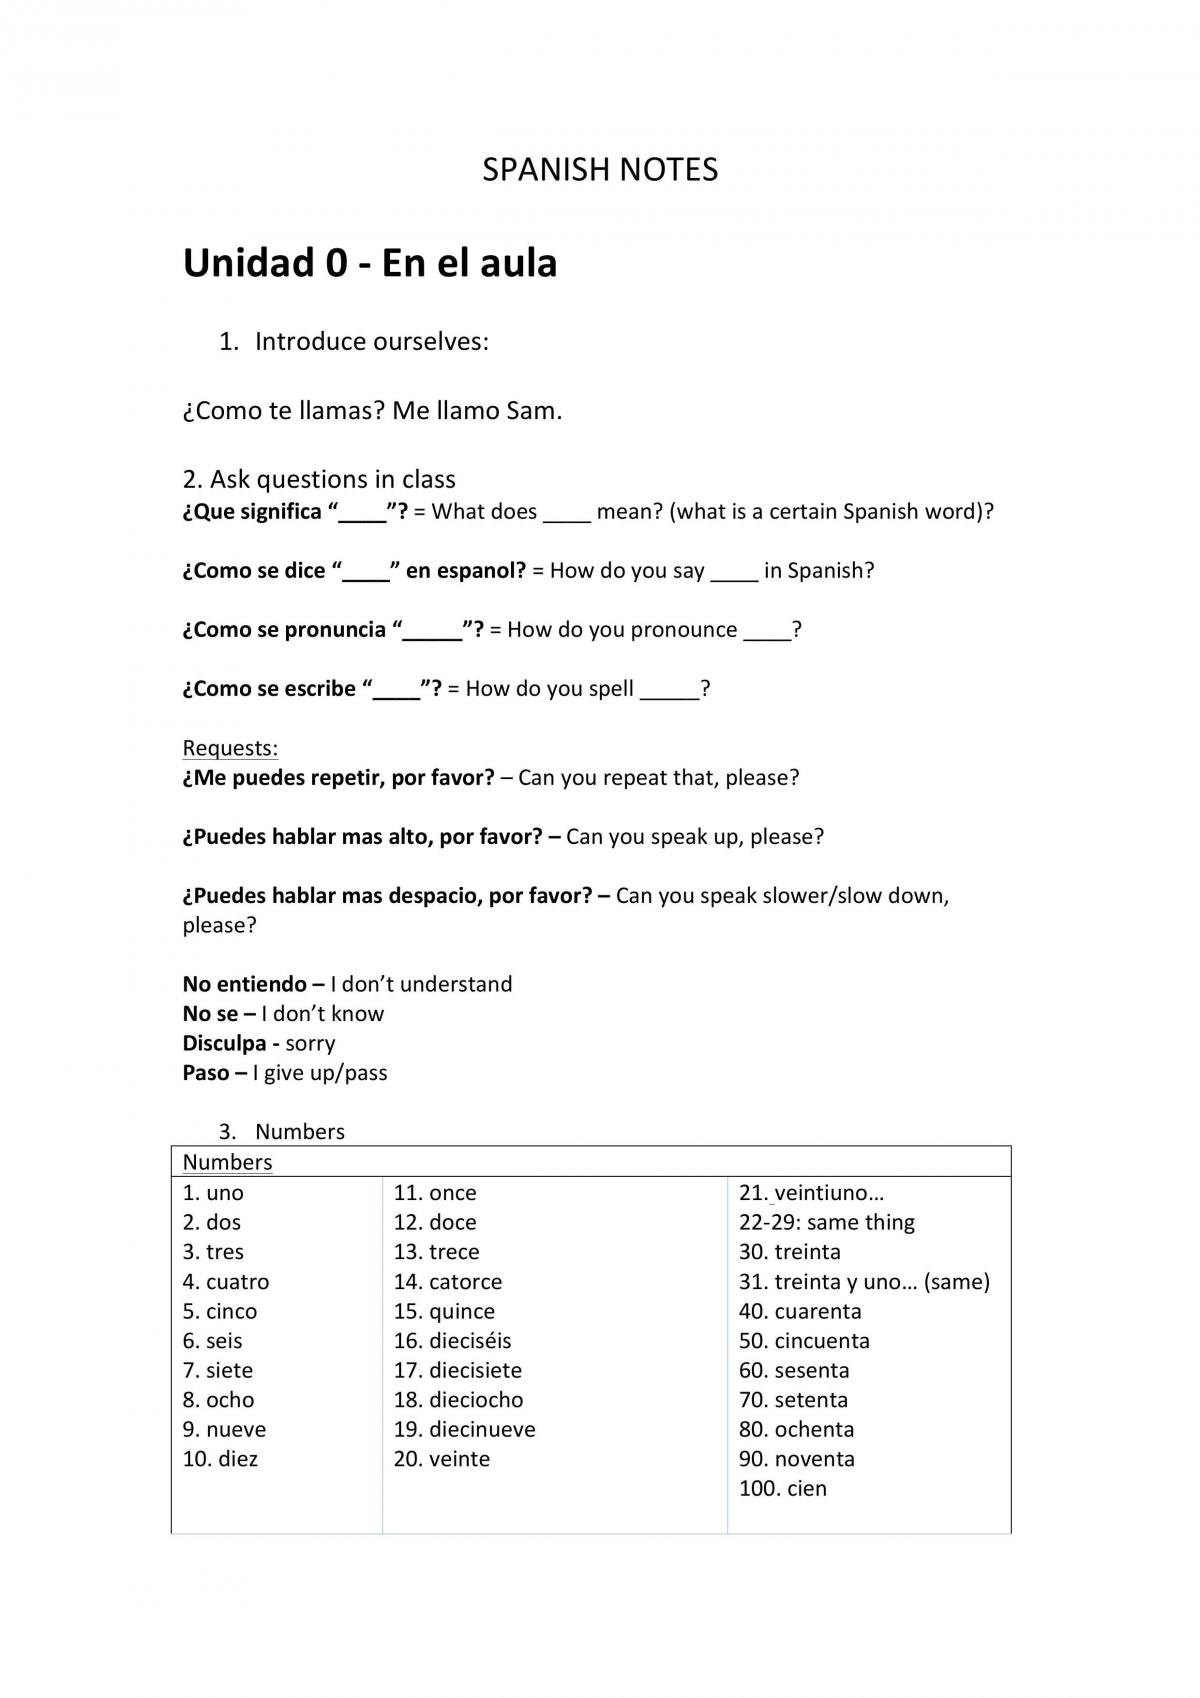 Notes for Spanish Level 1 - Page 1